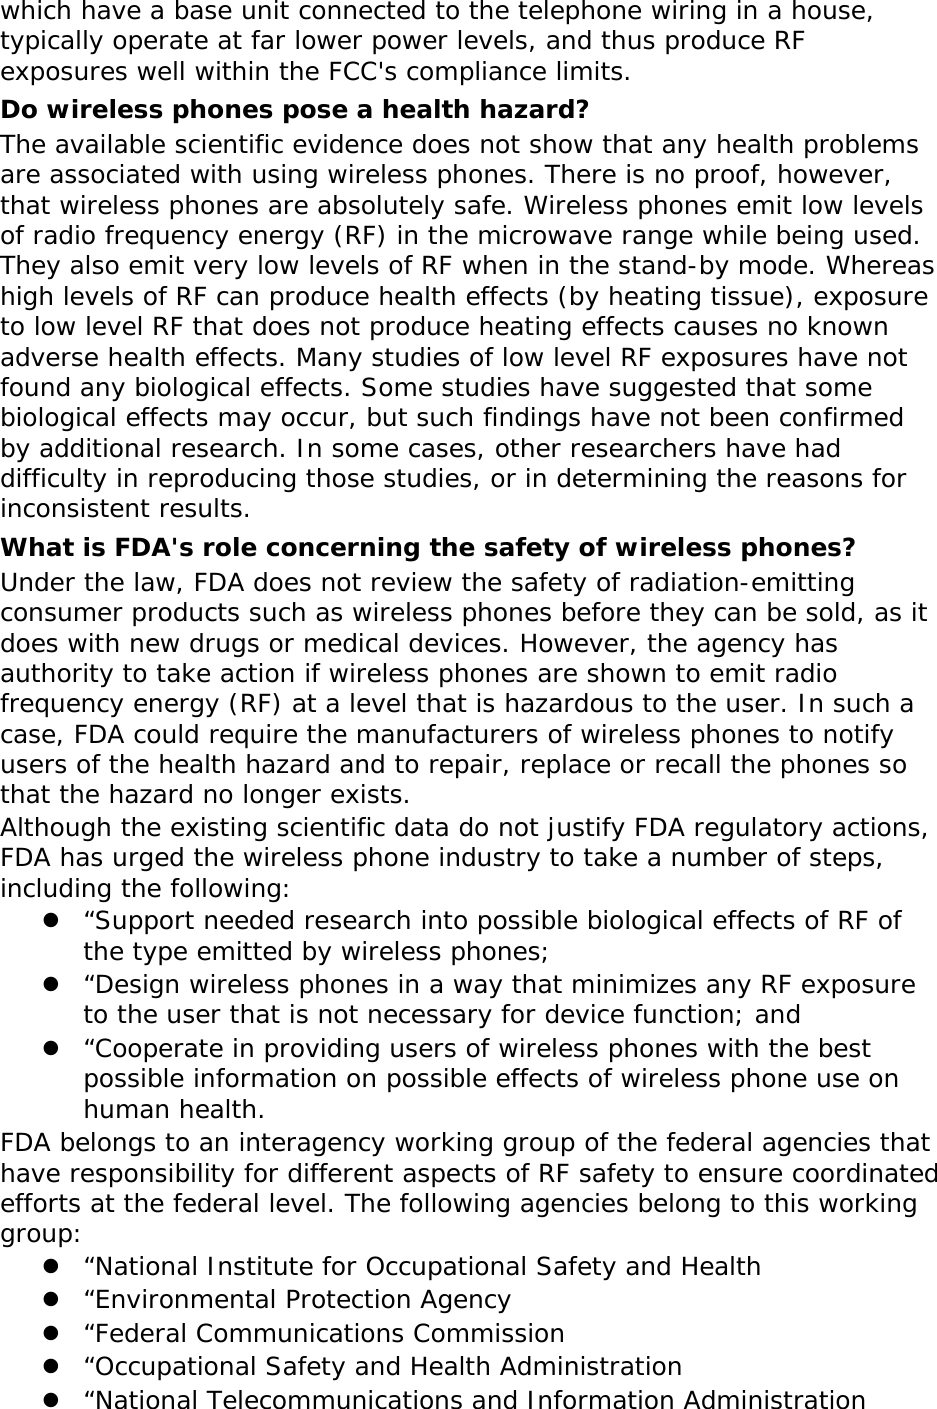 which have a base unit connected to the telephone wiring in a house, typically operate at far lower power levels, and thus produce RF exposures well within the FCC&apos;s compliance limits. Do wireless phones pose a health hazard? The available scientific evidence does not show that any health problems are associated with using wireless phones. There is no proof, however, that wireless phones are absolutely safe. Wireless phones emit low levels of radio frequency energy (RF) in the microwave range while being used. They also emit very low levels of RF when in the stand-by mode. Whereas high levels of RF can produce health effects (by heating tissue), exposure to low level RF that does not produce heating effects causes no known adverse health effects. Many studies of low level RF exposures have not found any biological effects. Some studies have suggested that some biological effects may occur, but such findings have not been confirmed by additional research. In some cases, other researchers have had difficulty in reproducing those studies, or in determining the reasons for inconsistent results. What is FDA&apos;s role concerning the safety of wireless phones? Under the law, FDA does not review the safety of radiation-emitting consumer products such as wireless phones before they can be sold, as it does with new drugs or medical devices. However, the agency has authority to take action if wireless phones are shown to emit radio frequency energy (RF) at a level that is hazardous to the user. In such a case, FDA could require the manufacturers of wireless phones to notify users of the health hazard and to repair, replace or recall the phones so that the hazard no longer exists. Although the existing scientific data do not justify FDA regulatory actions, FDA has urged the wireless phone industry to take a number of steps, including the following:  “Support needed research into possible biological effects of RF of the type emitted by wireless phones;  “Design wireless phones in a way that minimizes any RF exposure to the user that is not necessary for device function; and  “Cooperate in providing users of wireless phones with the best possible information on possible effects of wireless phone use on human health. FDA belongs to an interagency working group of the federal agencies that have responsibility for different aspects of RF safety to ensure coordinated efforts at the federal level. The following agencies belong to this working group:  “National Institute for Occupational Safety and Health  “Environmental Protection Agency  “Federal Communications Commission  “Occupational Safety and Health Administration  “National Telecommunications and Information Administration 